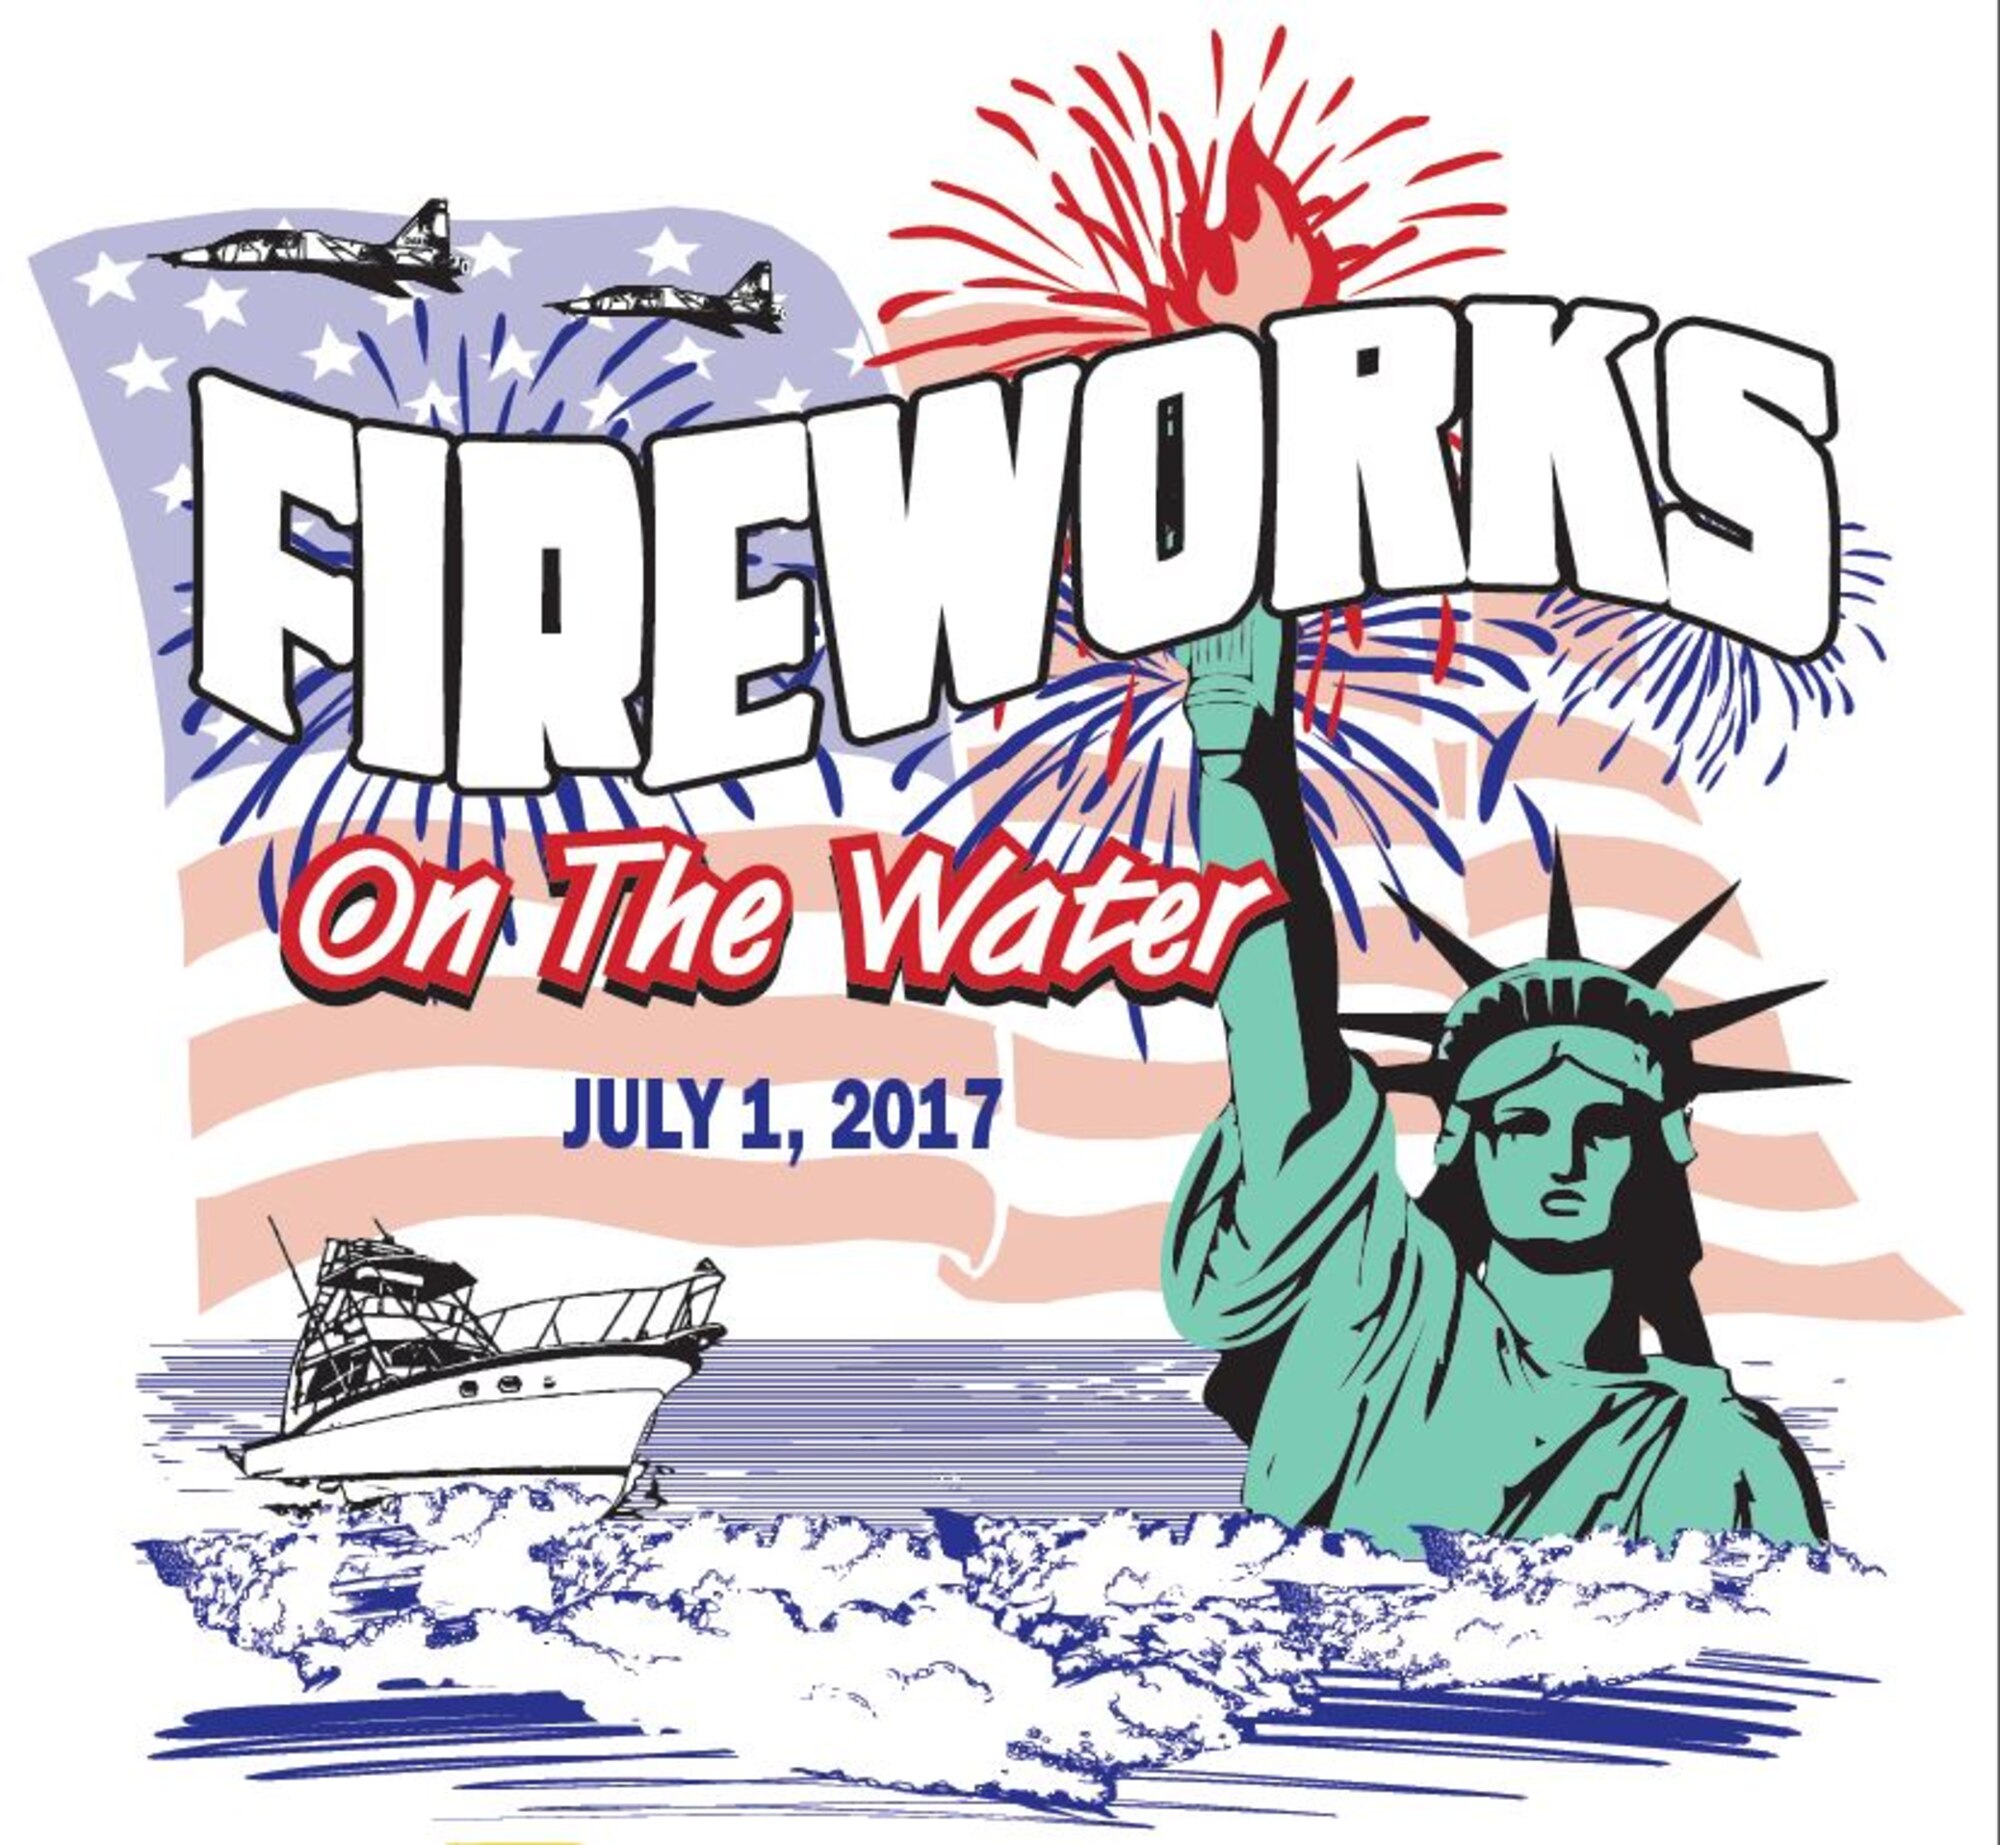 On Saturday, July 1, fireworks will fly over the Stennis Lock and Dam in a patriotic salute to our nation's history. The event, entitled 'Fireworks on the Water 2017,' is a free, open-to-the-public initiative between the community and Columbus Air Force Base celebrating Independence Day.